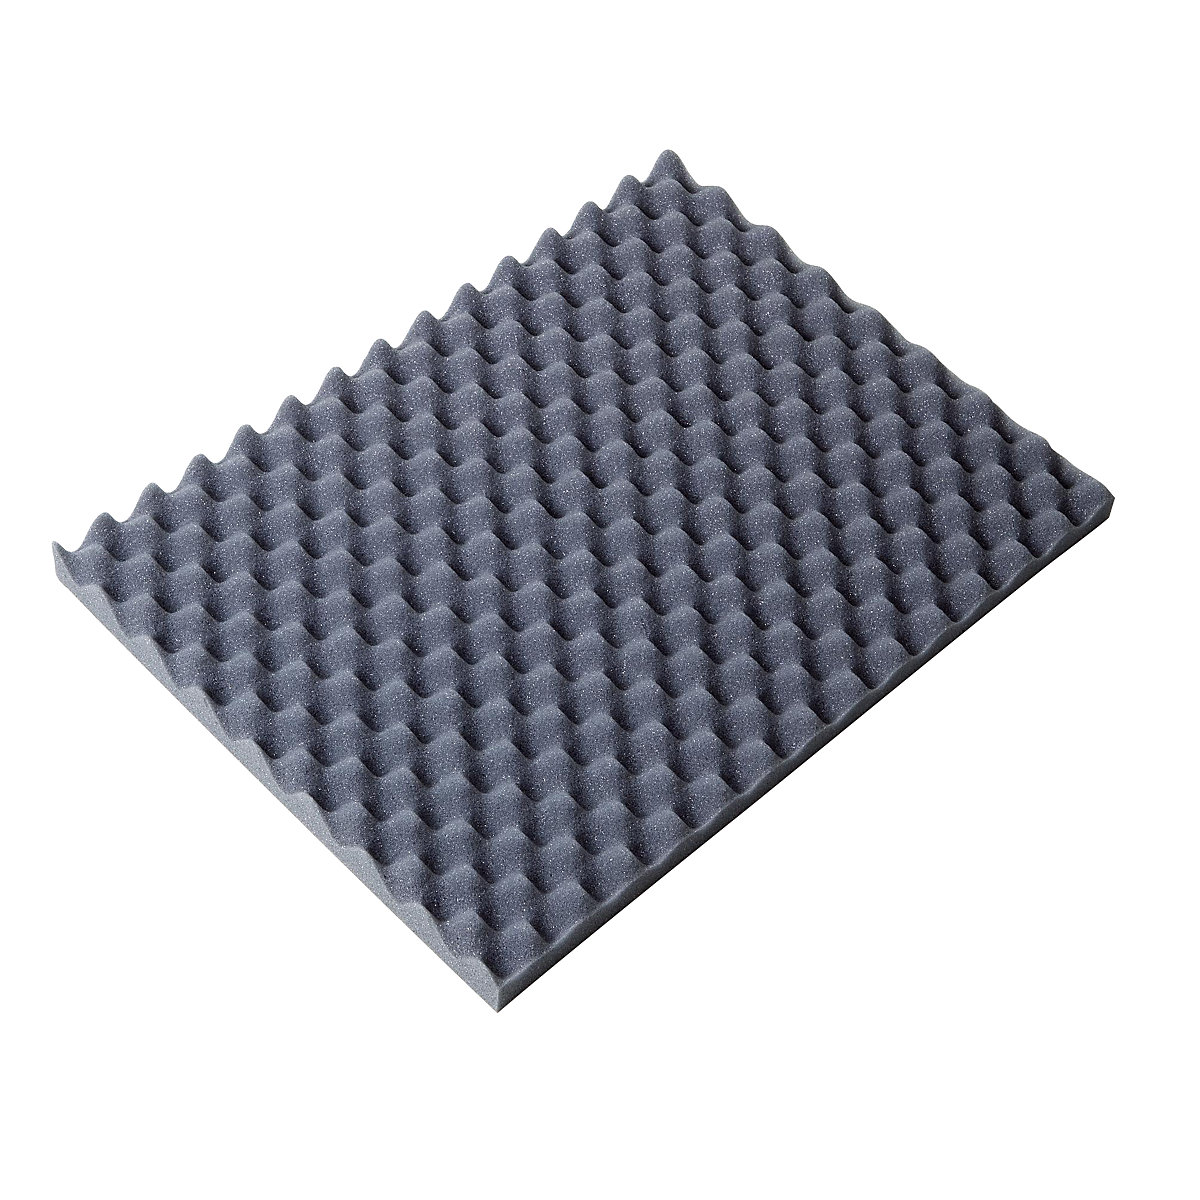 Egg crate foam sheet, 30 mm thick, LxW 400 x 300 mm, pack of 26, 3+ packs-7